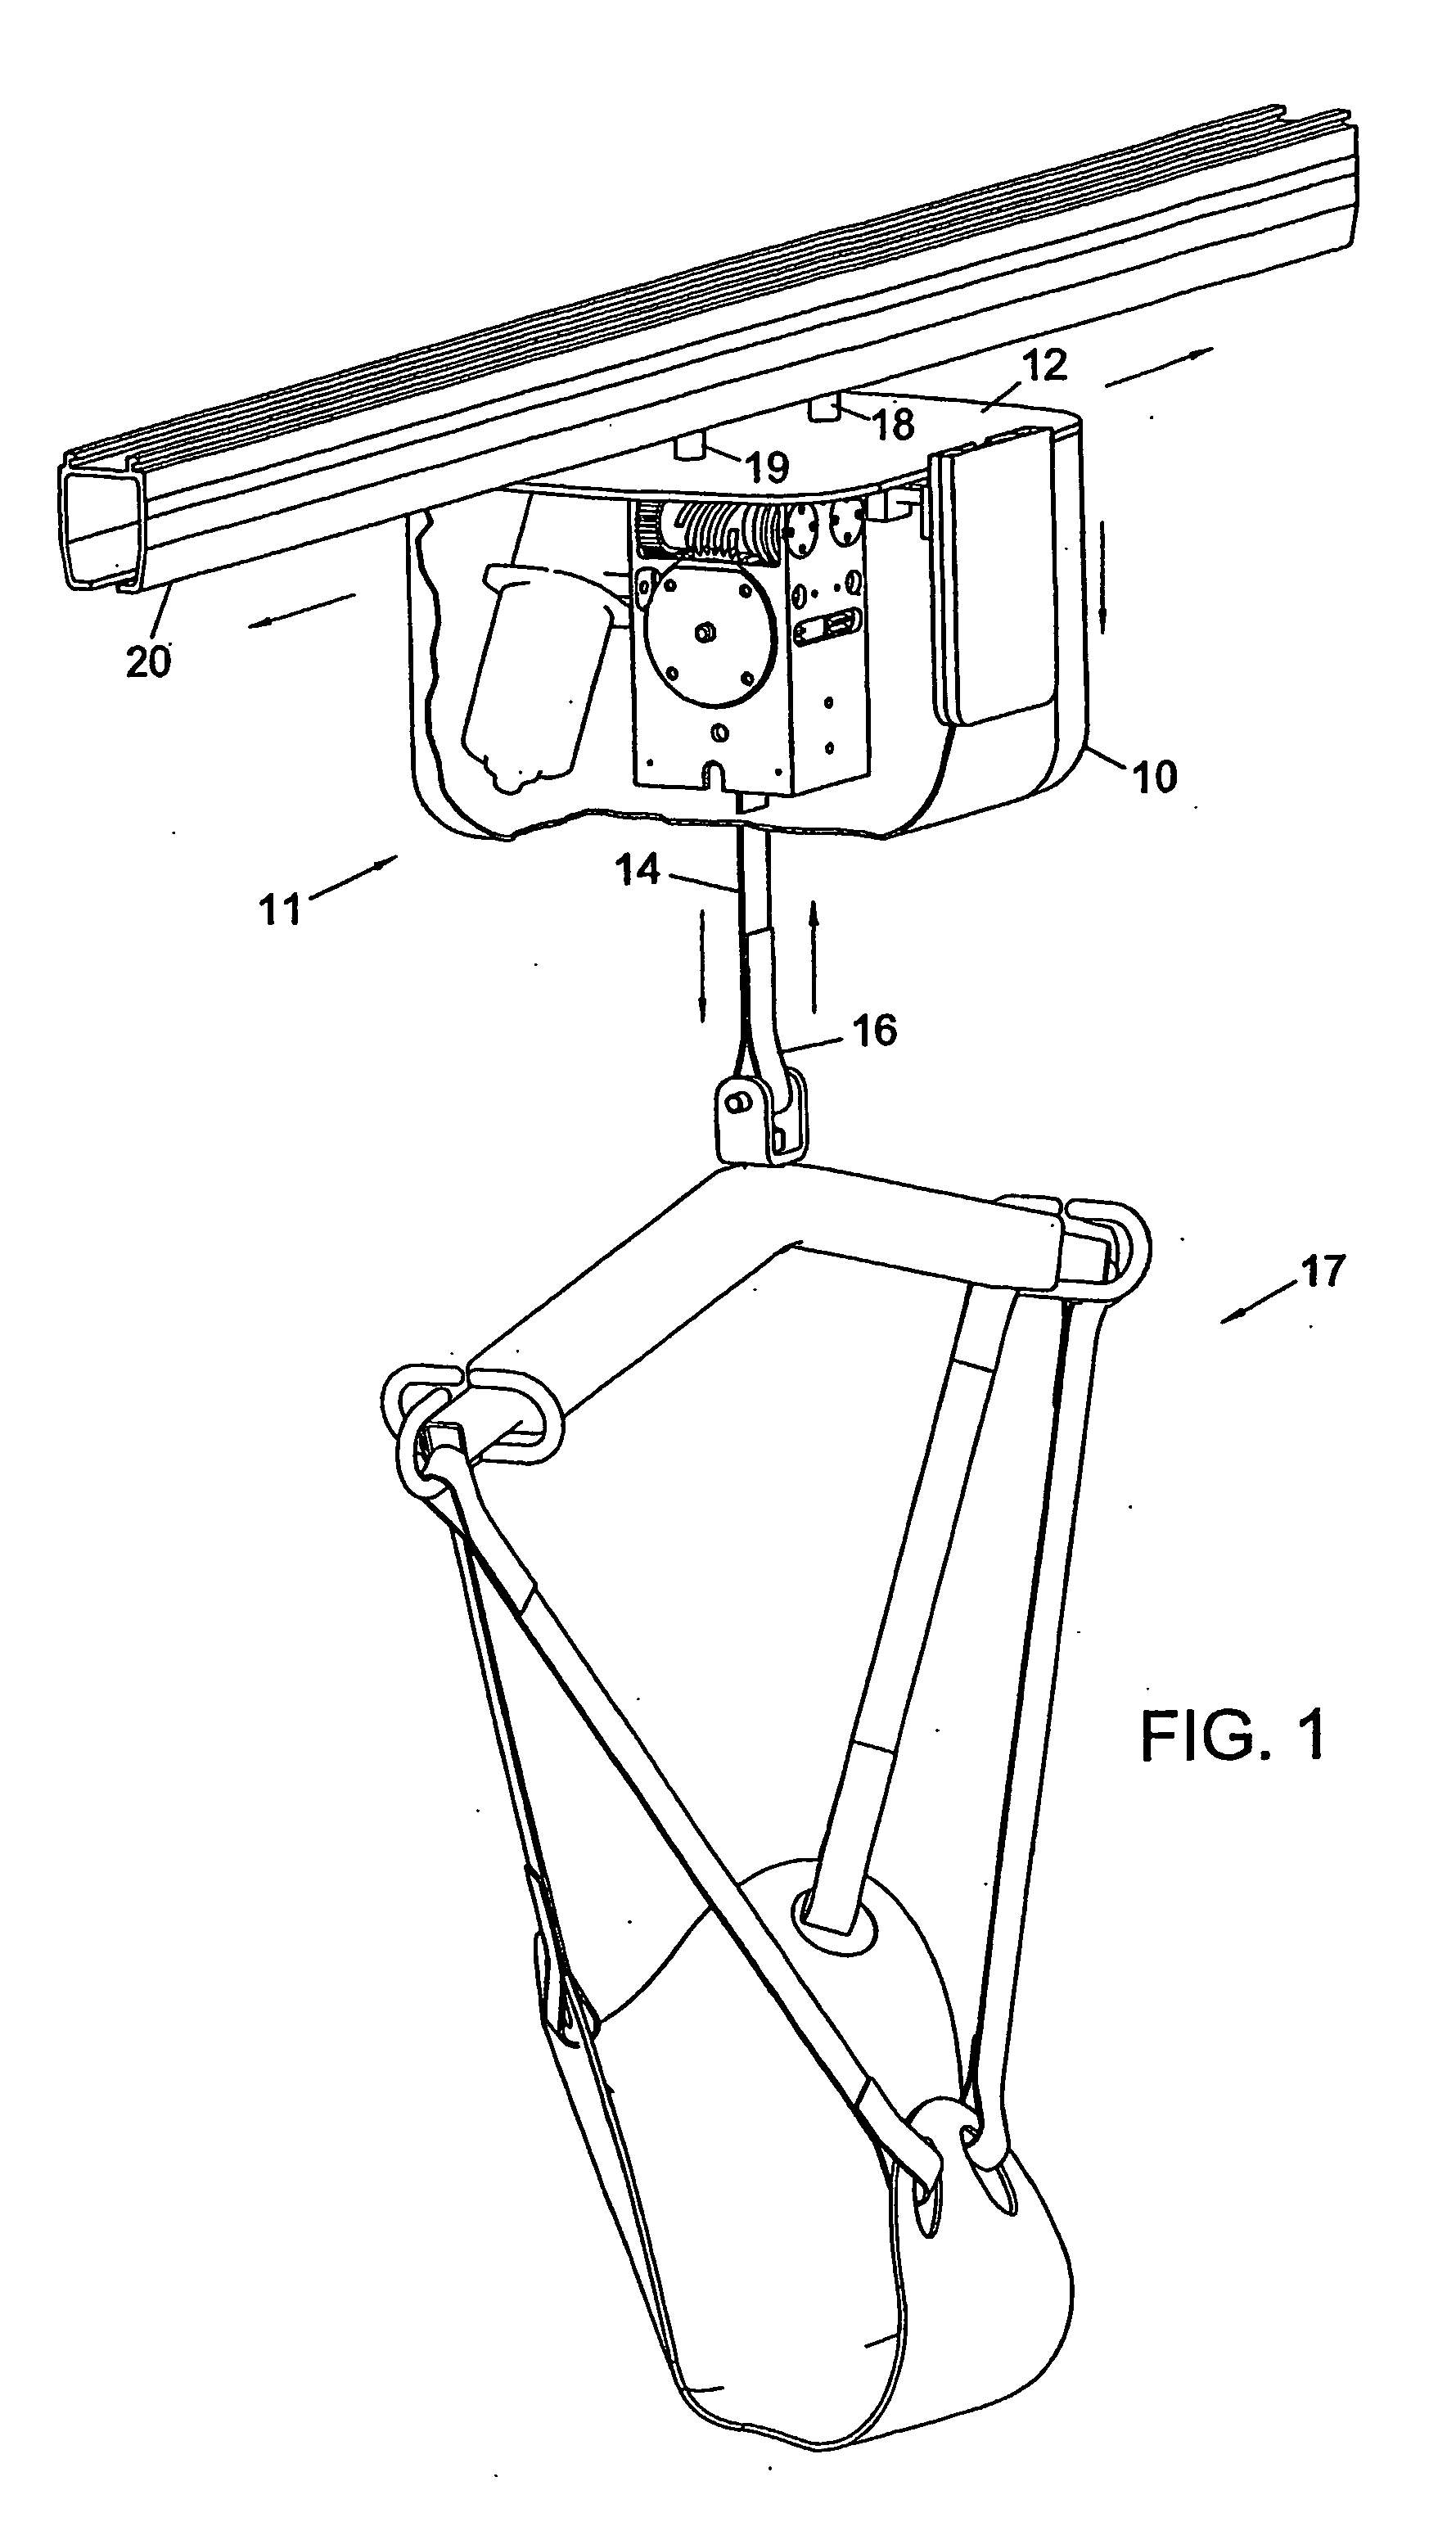 Personal lift device